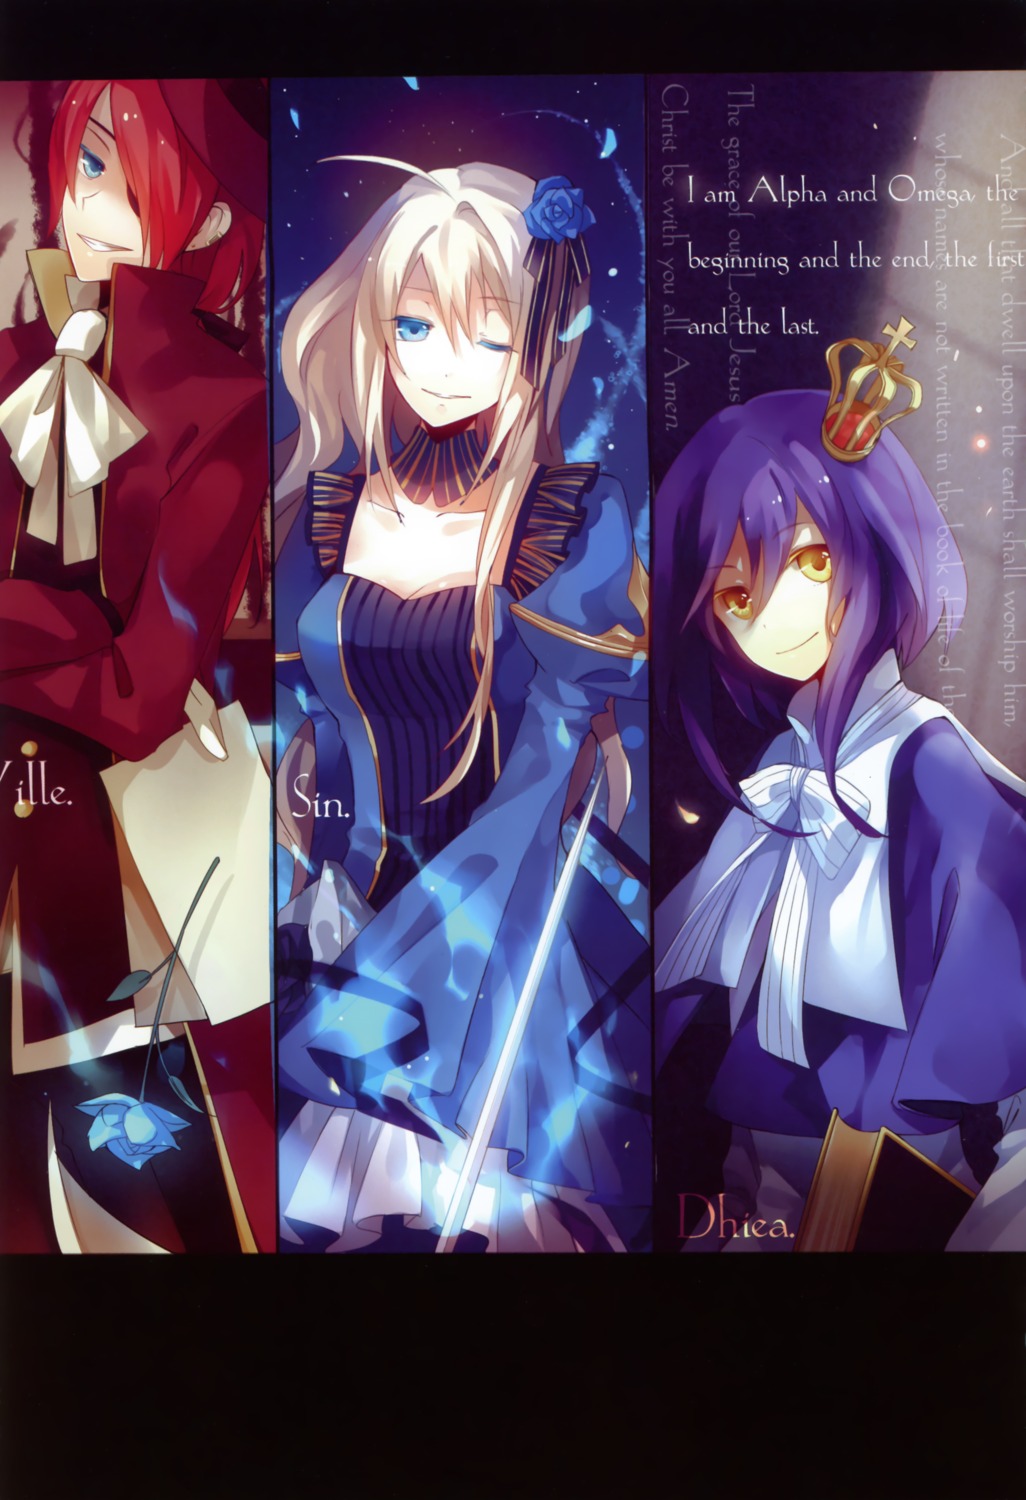 cleavage dhiea dhiea_seville dress eyepatch gothic_lolita lolita_fashion moe_shoujo_ryouiki pause sin_(pause) sword wille